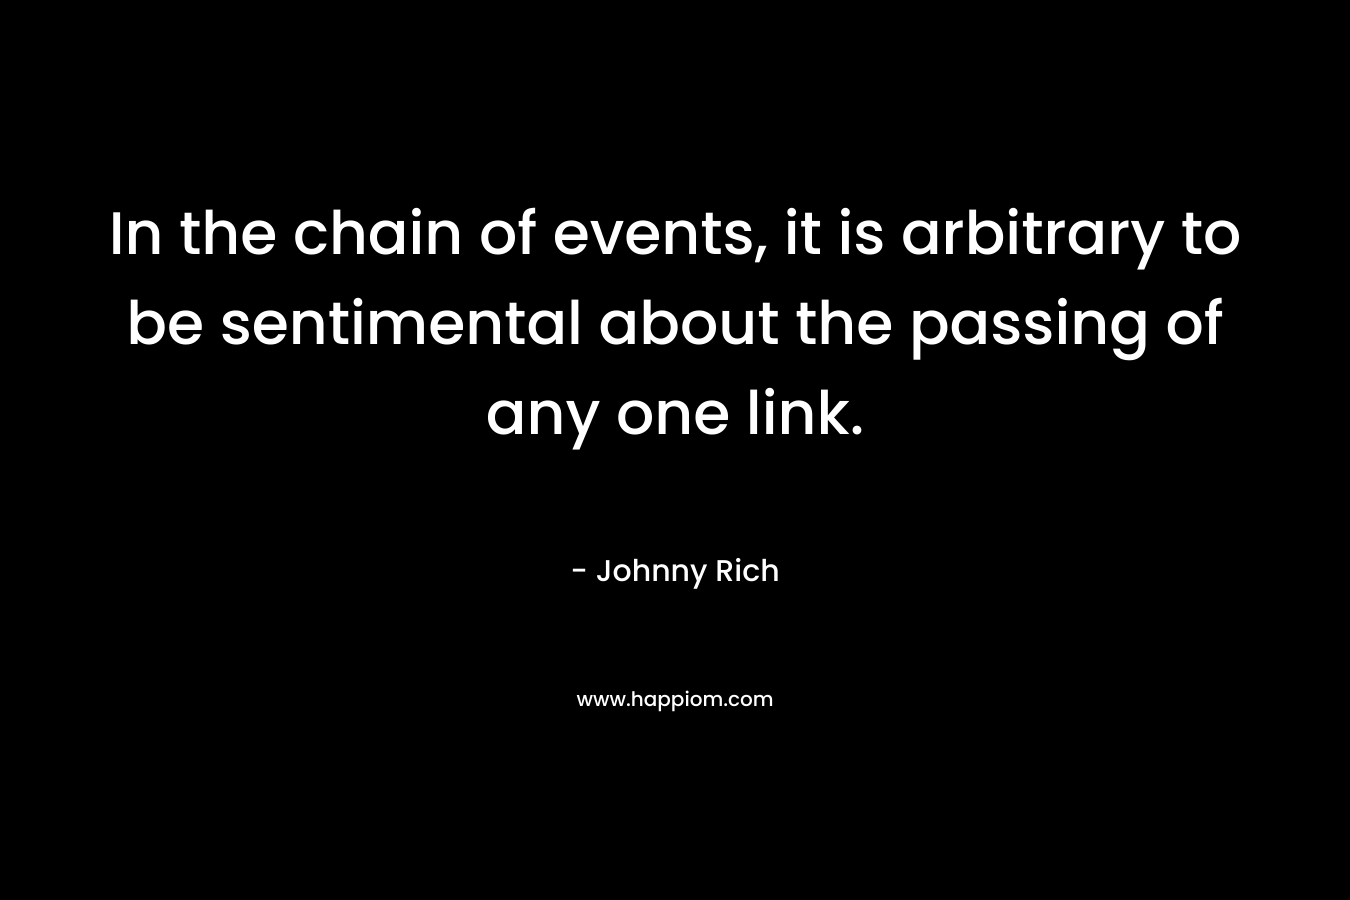 In the chain of events, it is arbitrary to be sentimental about the passing of any one link.